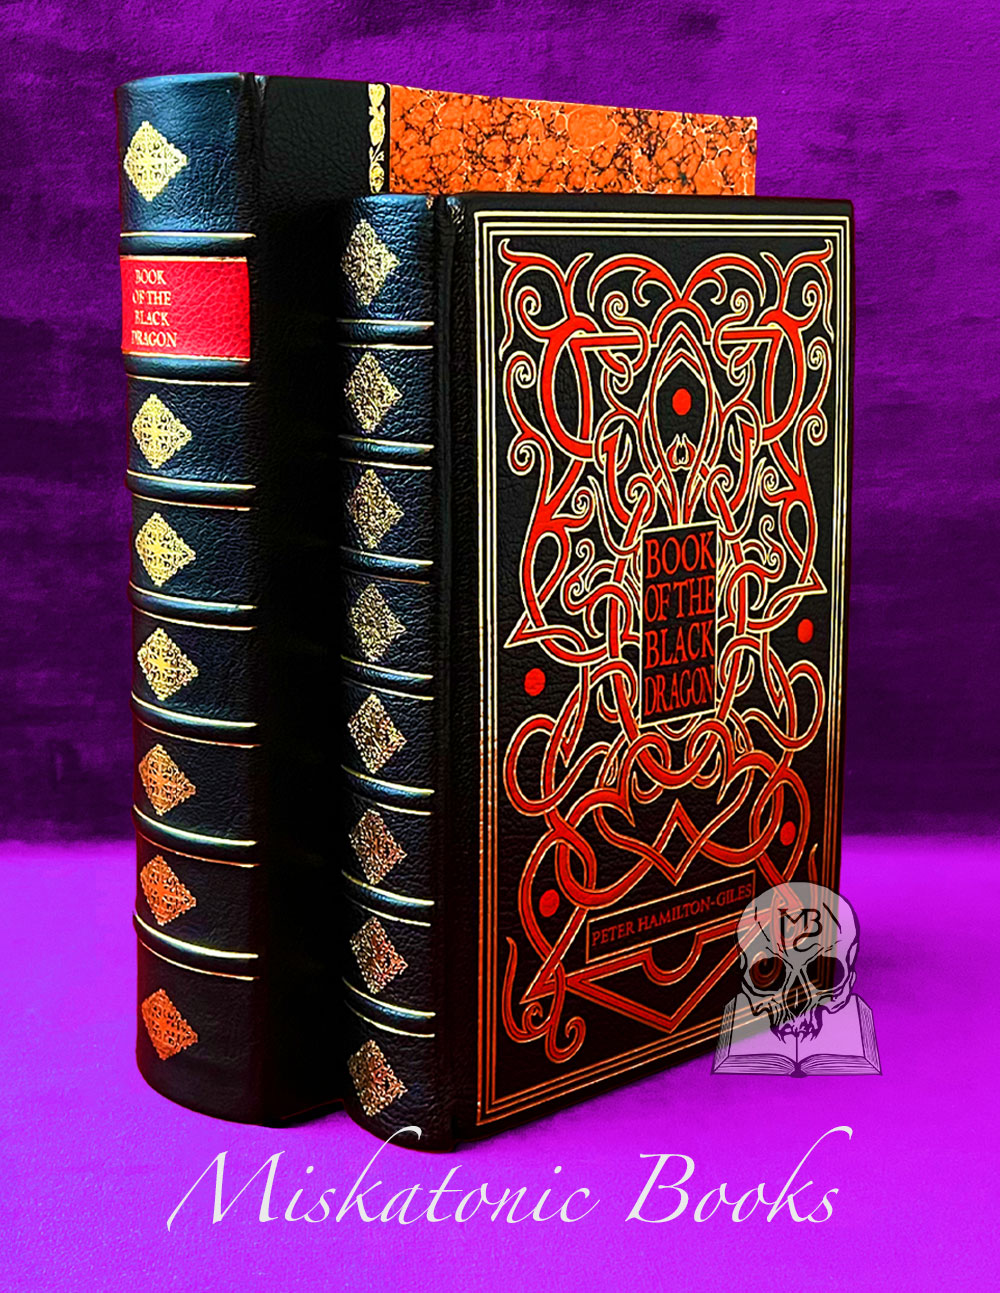 BOOK OF THE BLACK DRAGON Vol 1 - Et Nigrum Draconicum: being the theory of the Black Dragon by Peter Hamilton-Giles - Deluxe Edition bound in black goatskin and housed in a Solander traycase